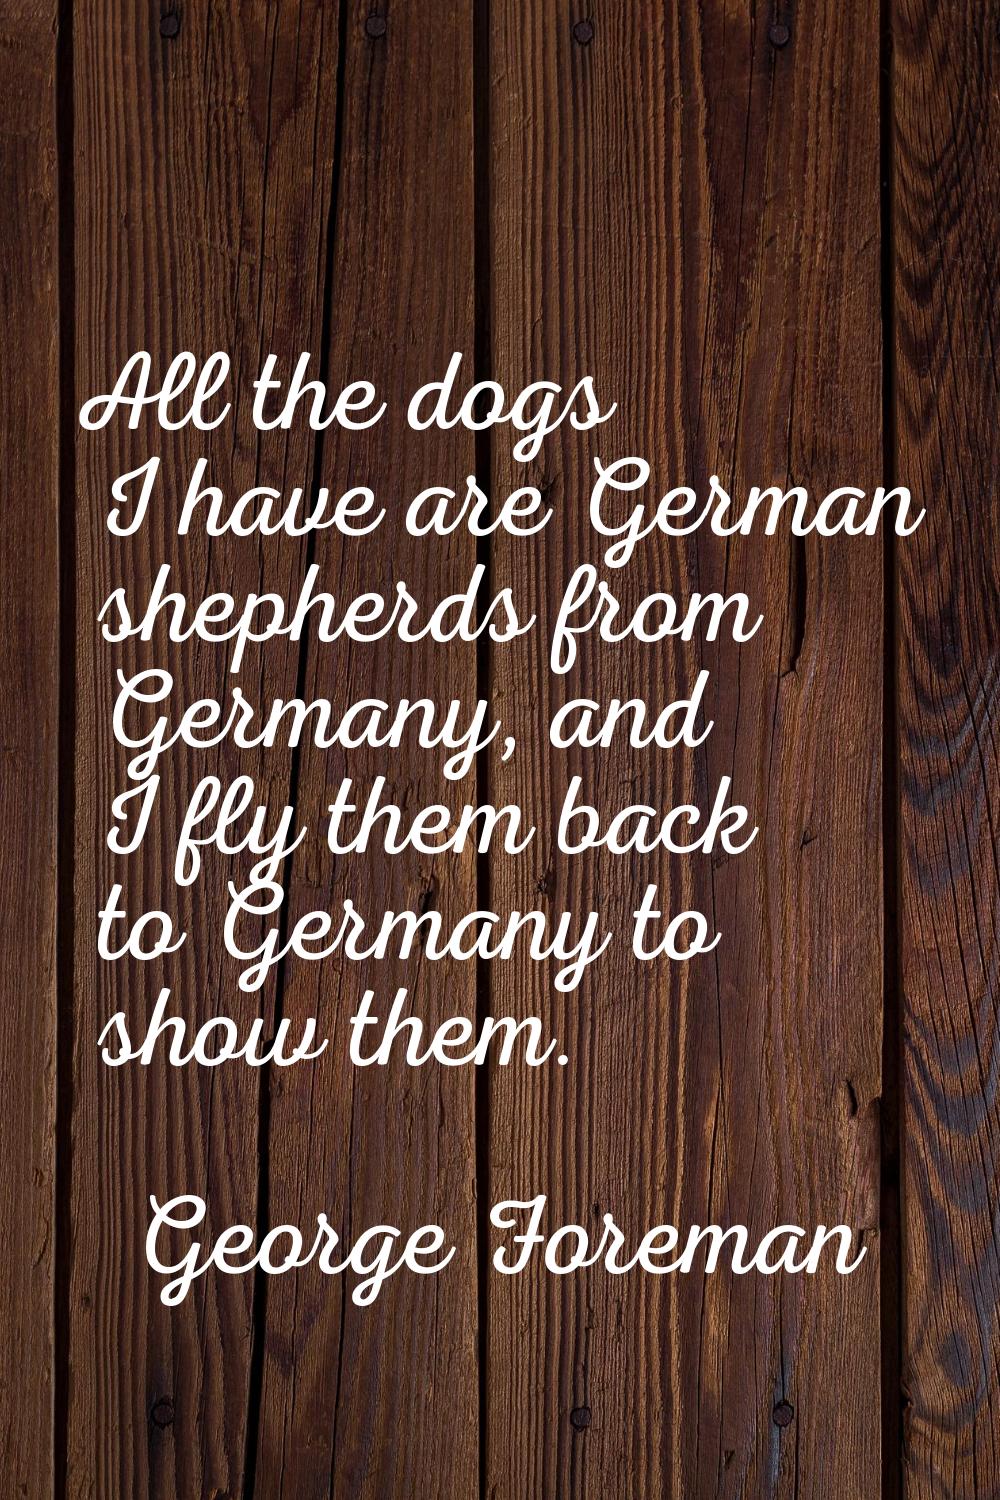 All the dogs I have are German shepherds from Germany, and I fly them back to Germany to show them.